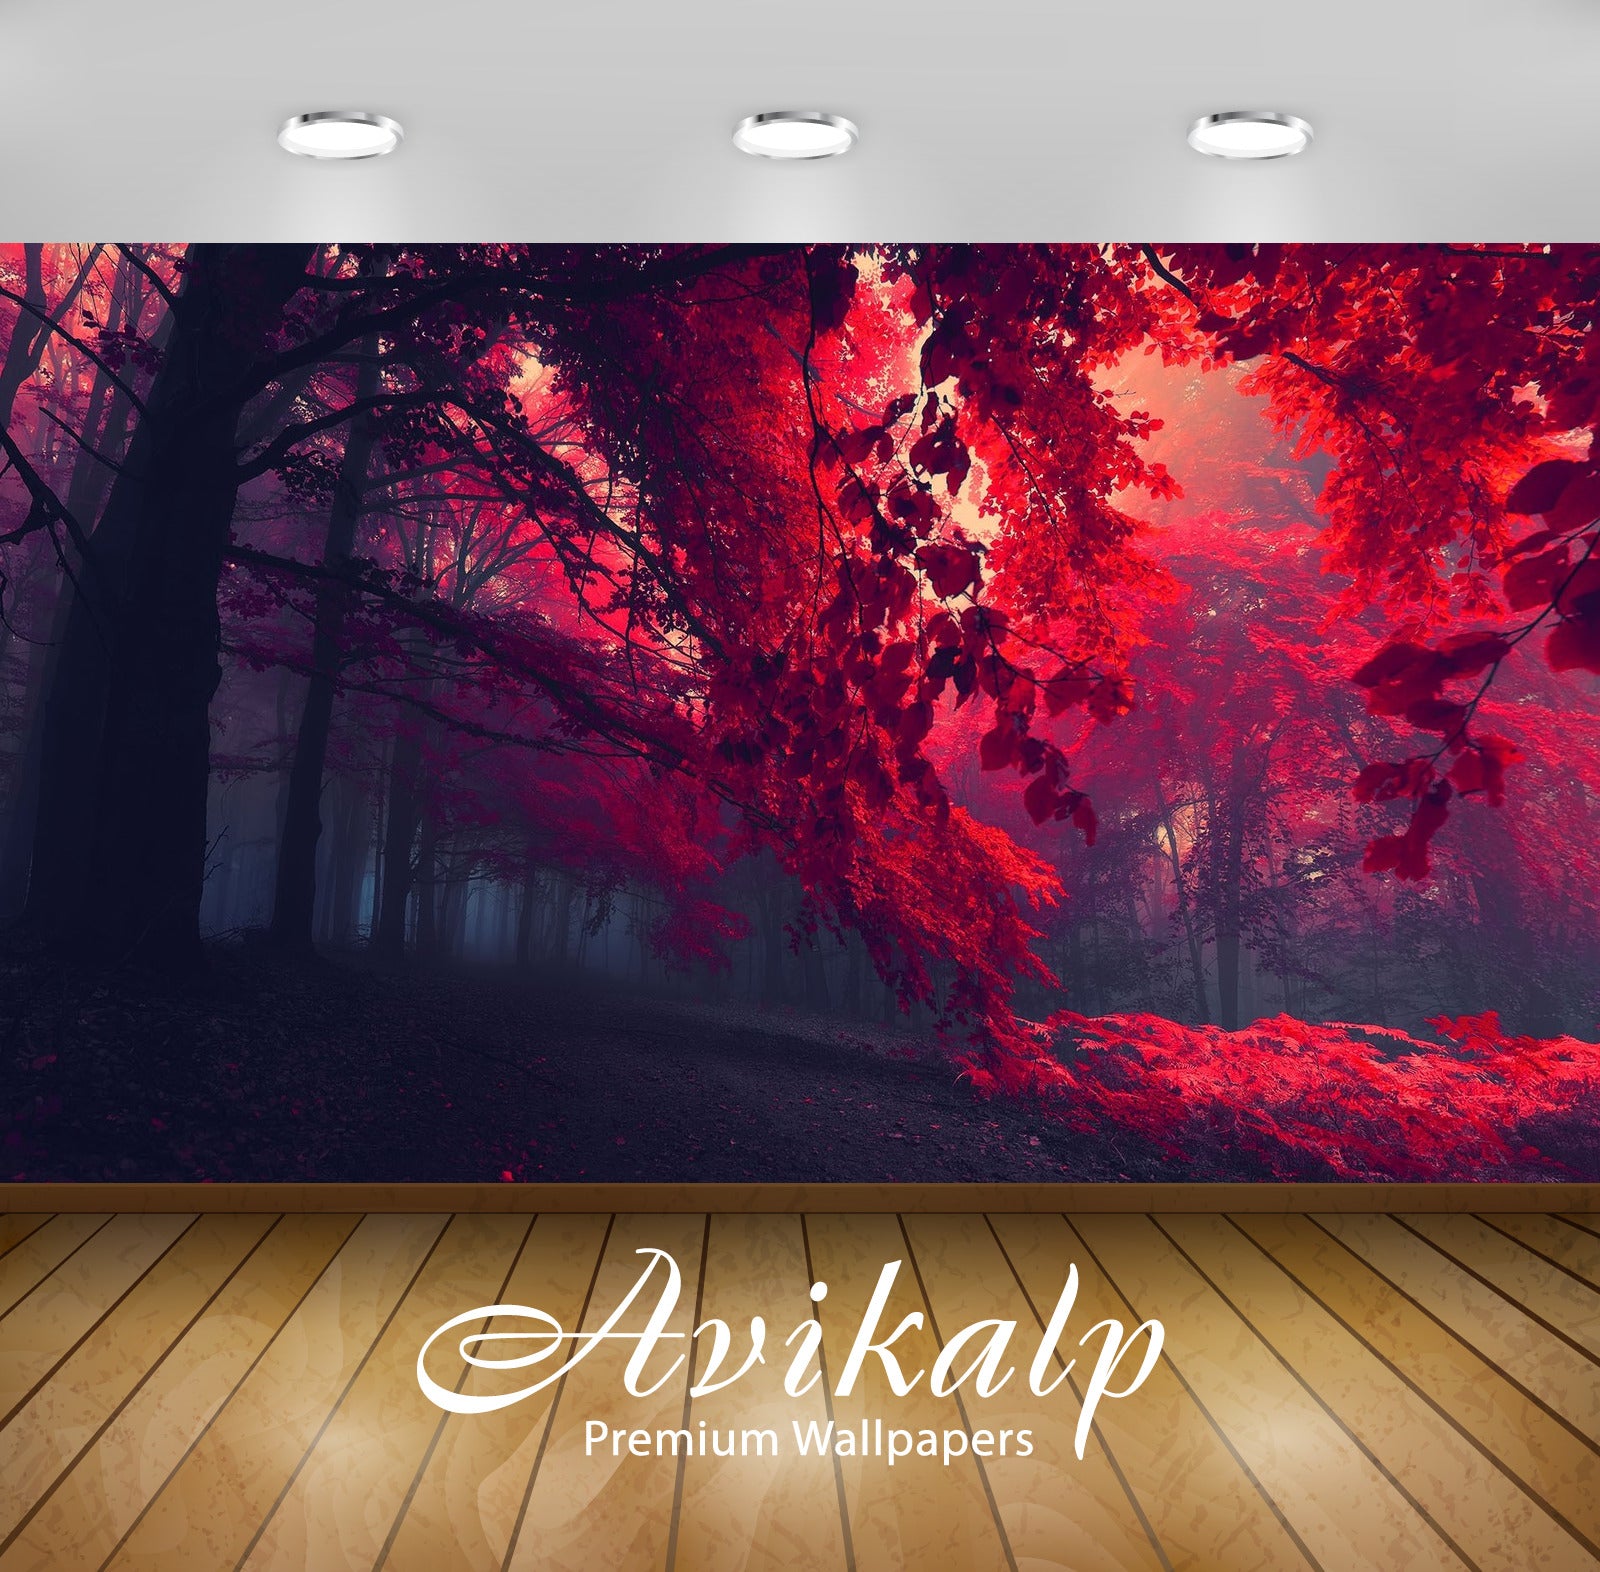 Avikalp Exclusive Awi1395 Beautiful Autumn Full HD Wallpapers for Living room, Hall, Kids Room, Kitc